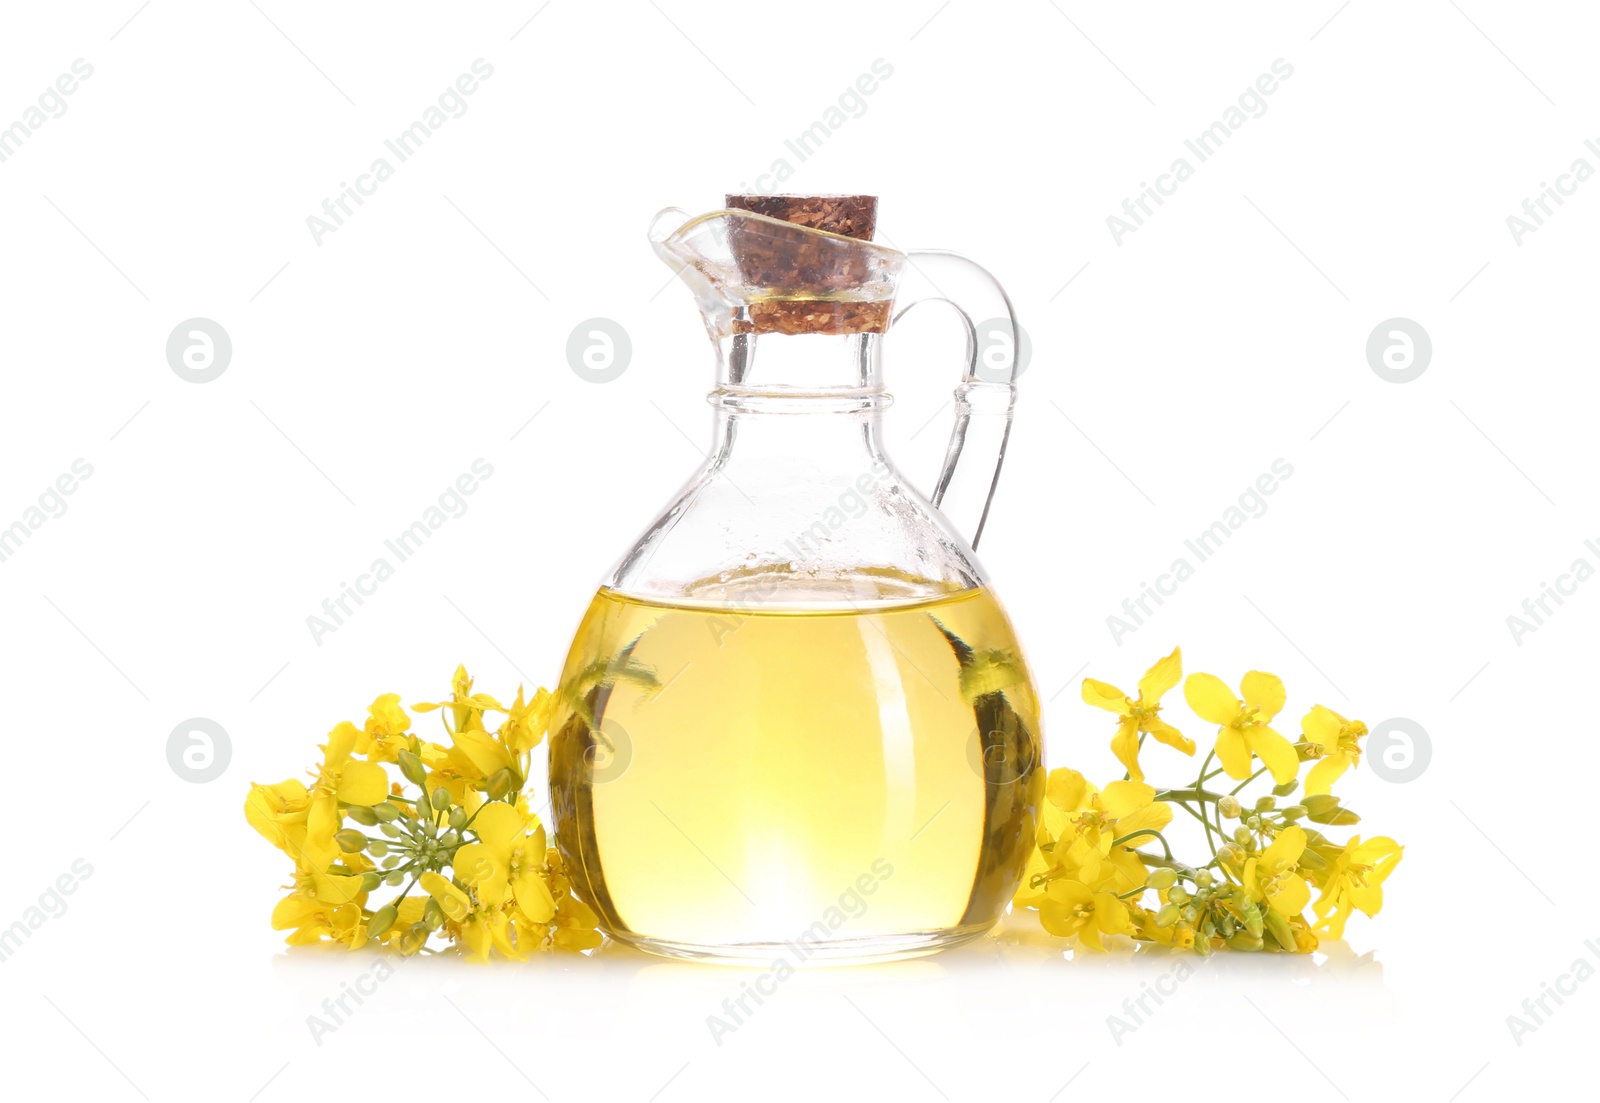 Photo of Rapeseed oil in glass jug and yellow flowers isolated on white